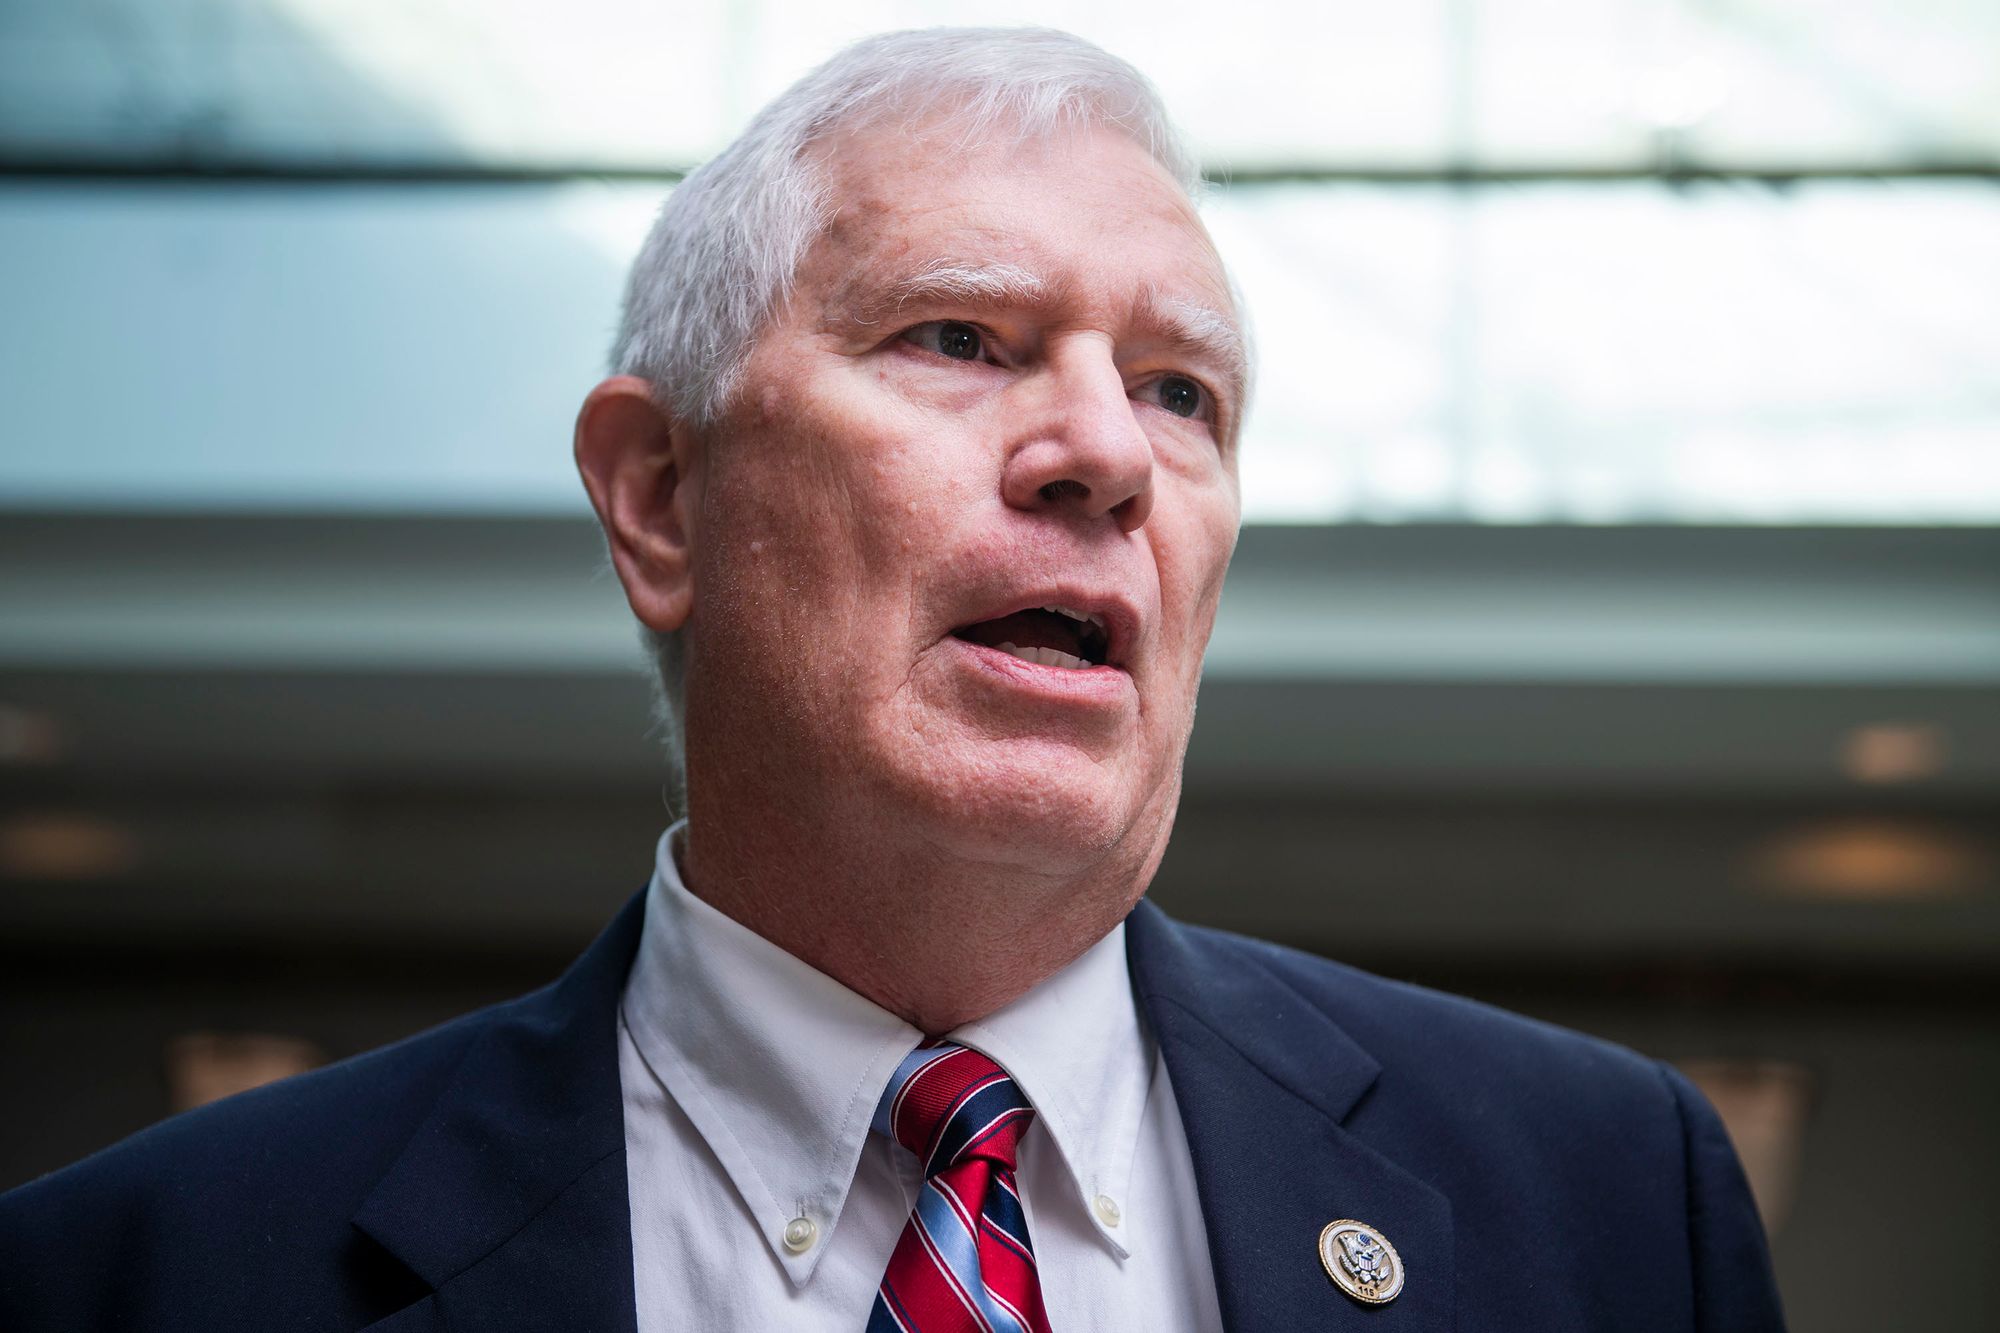 Mo Brooks Compared Biden’s Election to the Start of the Civil War. Now He Wants a Senate Seat.